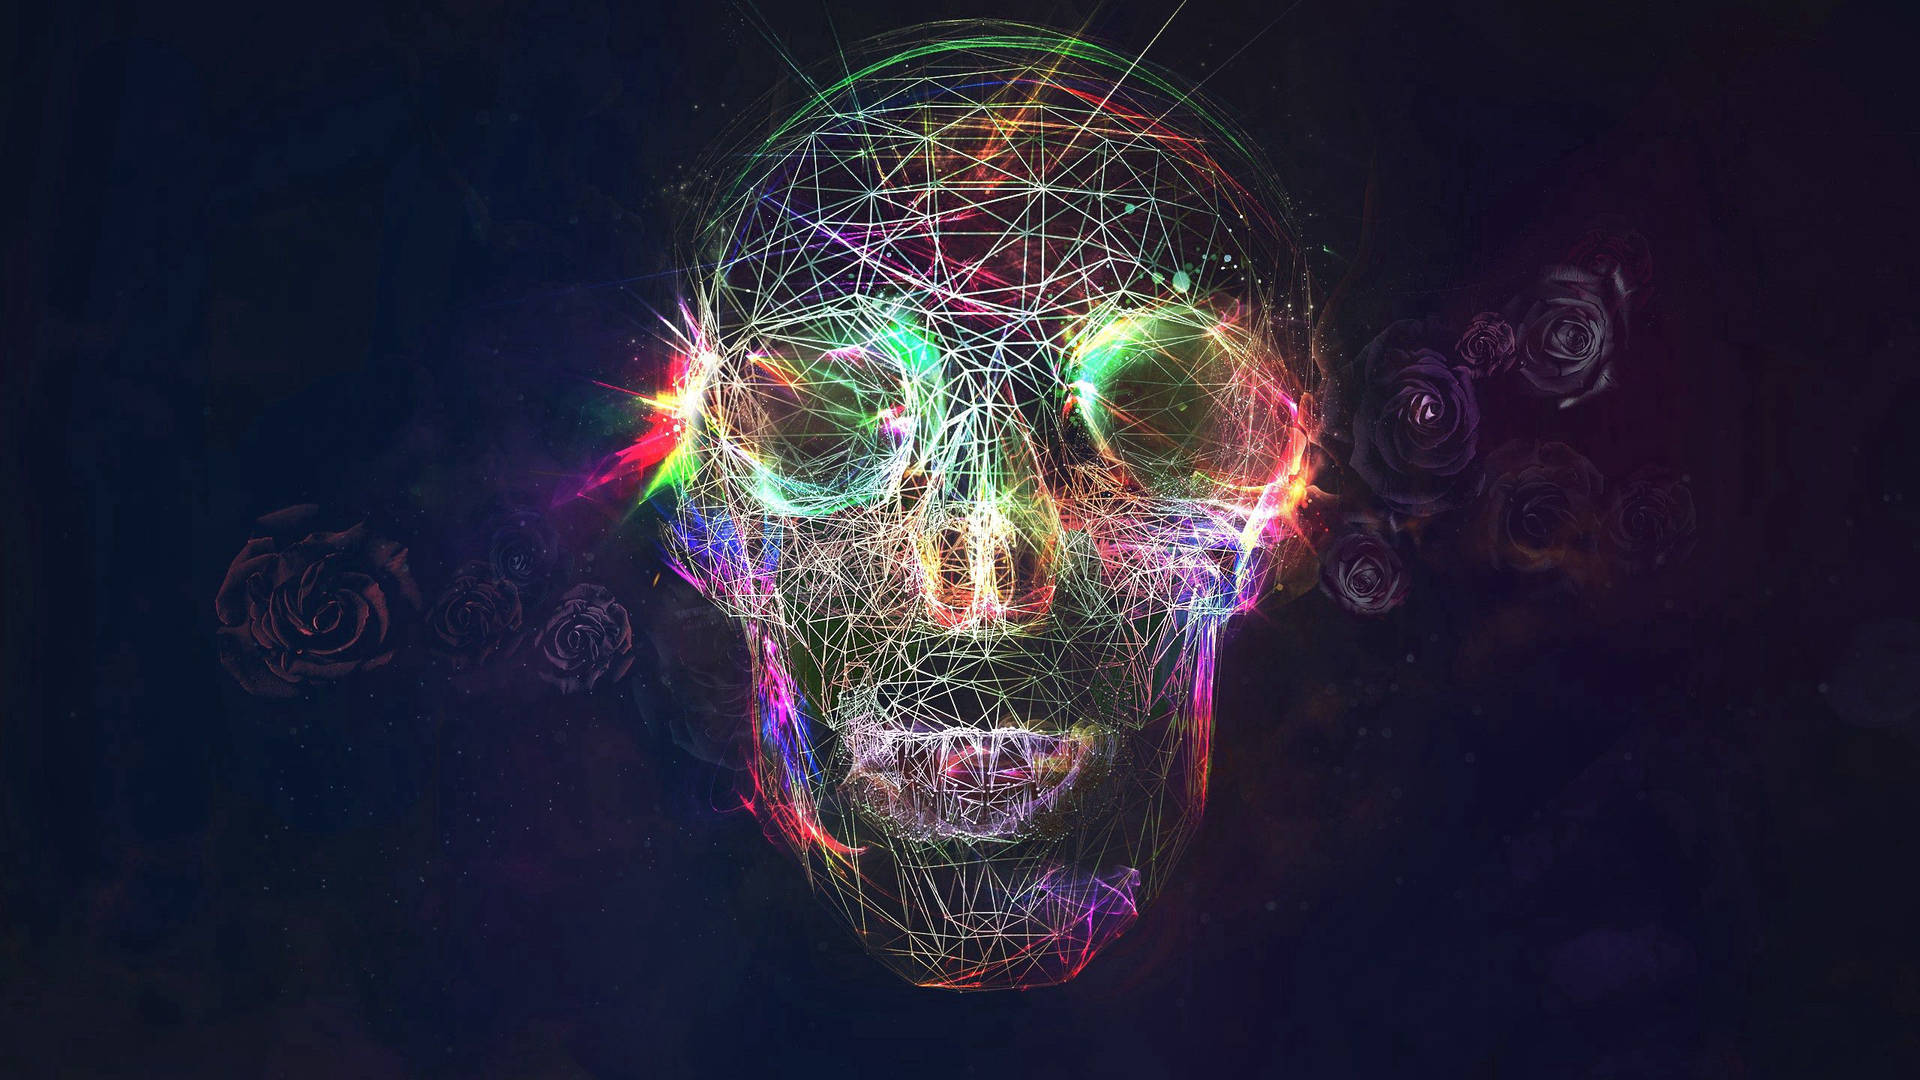 "A Bright and Colorful Skull Symbolizing Life and Death" Wallpaper